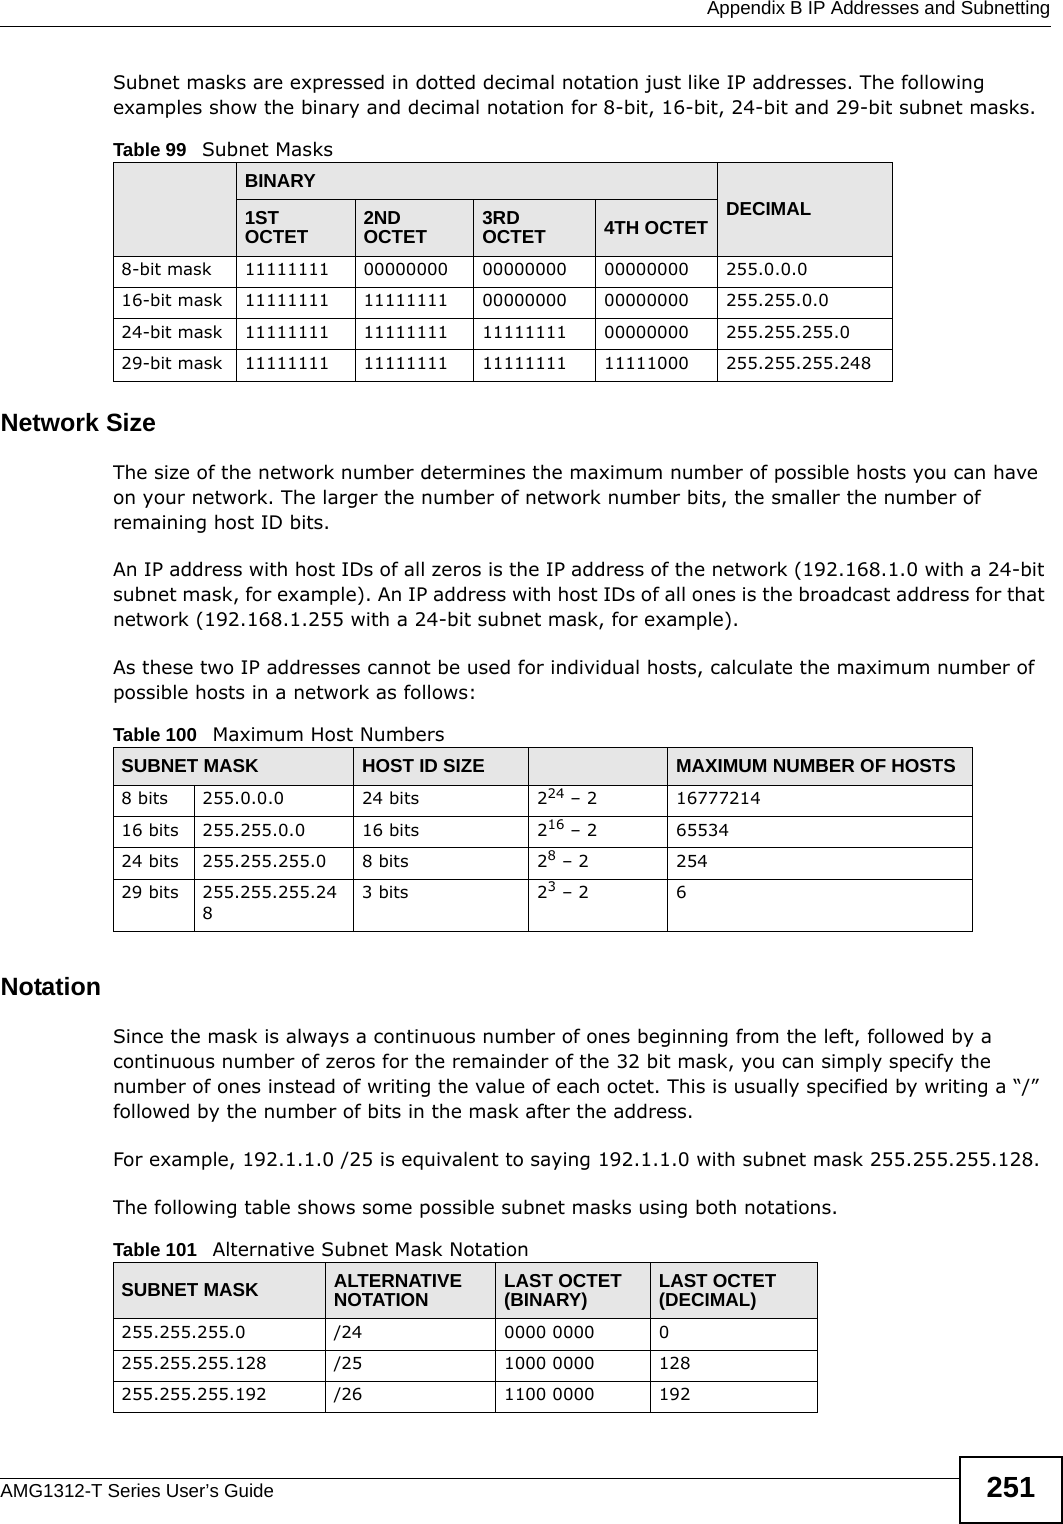  Appendix B IP Addresses and SubnettingAMG1312-T Series User’s Guide 251Subnet masks are expressed in dotted decimal notation just like IP addresses. The following examples show the binary and decimal notation for 8-bit, 16-bit, 24-bit and 29-bit subnet masks. Network SizeThe size of the network number determines the maximum number of possible hosts you can have on your network. The larger the number of network number bits, the smaller the number of remaining host ID bits. An IP address with host IDs of all zeros is the IP address of the network (192.168.1.0 with a 24-bit subnet mask, for example). An IP address with host IDs of all ones is the broadcast address for that network (192.168.1.255 with a 24-bit subnet mask, for example).As these two IP addresses cannot be used for individual hosts, calculate the maximum number of possible hosts in a network as follows:NotationSince the mask is always a continuous number of ones beginning from the left, followed by a continuous number of zeros for the remainder of the 32 bit mask, you can simply specify the number of ones instead of writing the value of each octet. This is usually specified by writing a “/” followed by the number of bits in the mask after the address. For example, 192.1.1.0 /25 is equivalent to saying 192.1.1.0 with subnet mask 255.255.255.128. The following table shows some possible subnet masks using both notations. Table 99   Subnet MasksBINARYDECIMAL1ST OCTET 2ND OCTET 3RD OCTET 4TH OCTET8-bit mask 11111111 00000000 00000000 00000000 255.0.0.016-bit mask 11111111 11111111 00000000 00000000 255.255.0.024-bit mask 11111111 11111111 11111111 00000000 255.255.255.029-bit mask 11111111 11111111 11111111 11111000 255.255.255.248Table 100   Maximum Host NumbersSUBNET MASK HOST ID SIZE MAXIMUM NUMBER OF HOSTS8 bits 255.0.0.0 24 bits 224 – 2 1677721416 bits 255.255.0.0 16 bits 216 – 2 6553424 bits 255.255.255.0 8 bits 28 – 2 25429 bits 255.255.255.2483 bits 23 – 2 6Table 101   Alternative Subnet Mask NotationSUBNET MASK ALTERNATIVE NOTATION LAST OCTET (BINARY) LAST OCTET (DECIMAL)255.255.255.0 /24 0000 0000 0255.255.255.128 /25 1000 0000 128255.255.255.192 /26 1100 0000 192